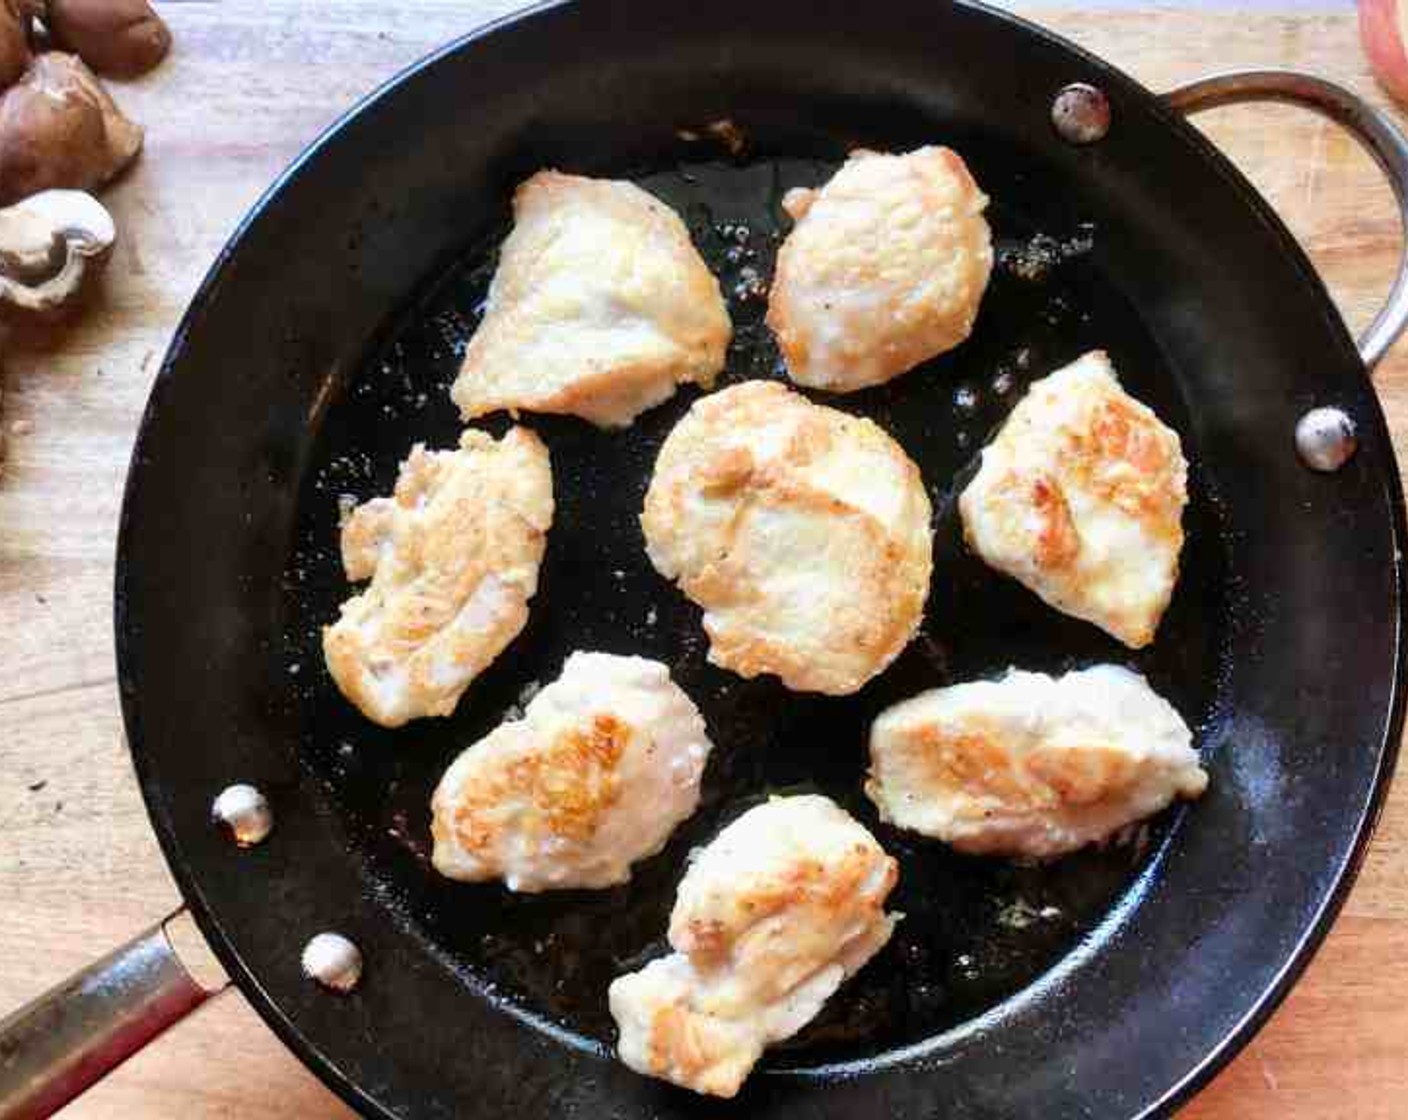 step 7 Heat a large skillet over medium heat, add Olive Oil (2 Tbsp). When the oil shimmers, add the prepared chicken to the skillet and fry for about 5 minutes per side or until golden. Remove the chicken from the skillet and set it aside.